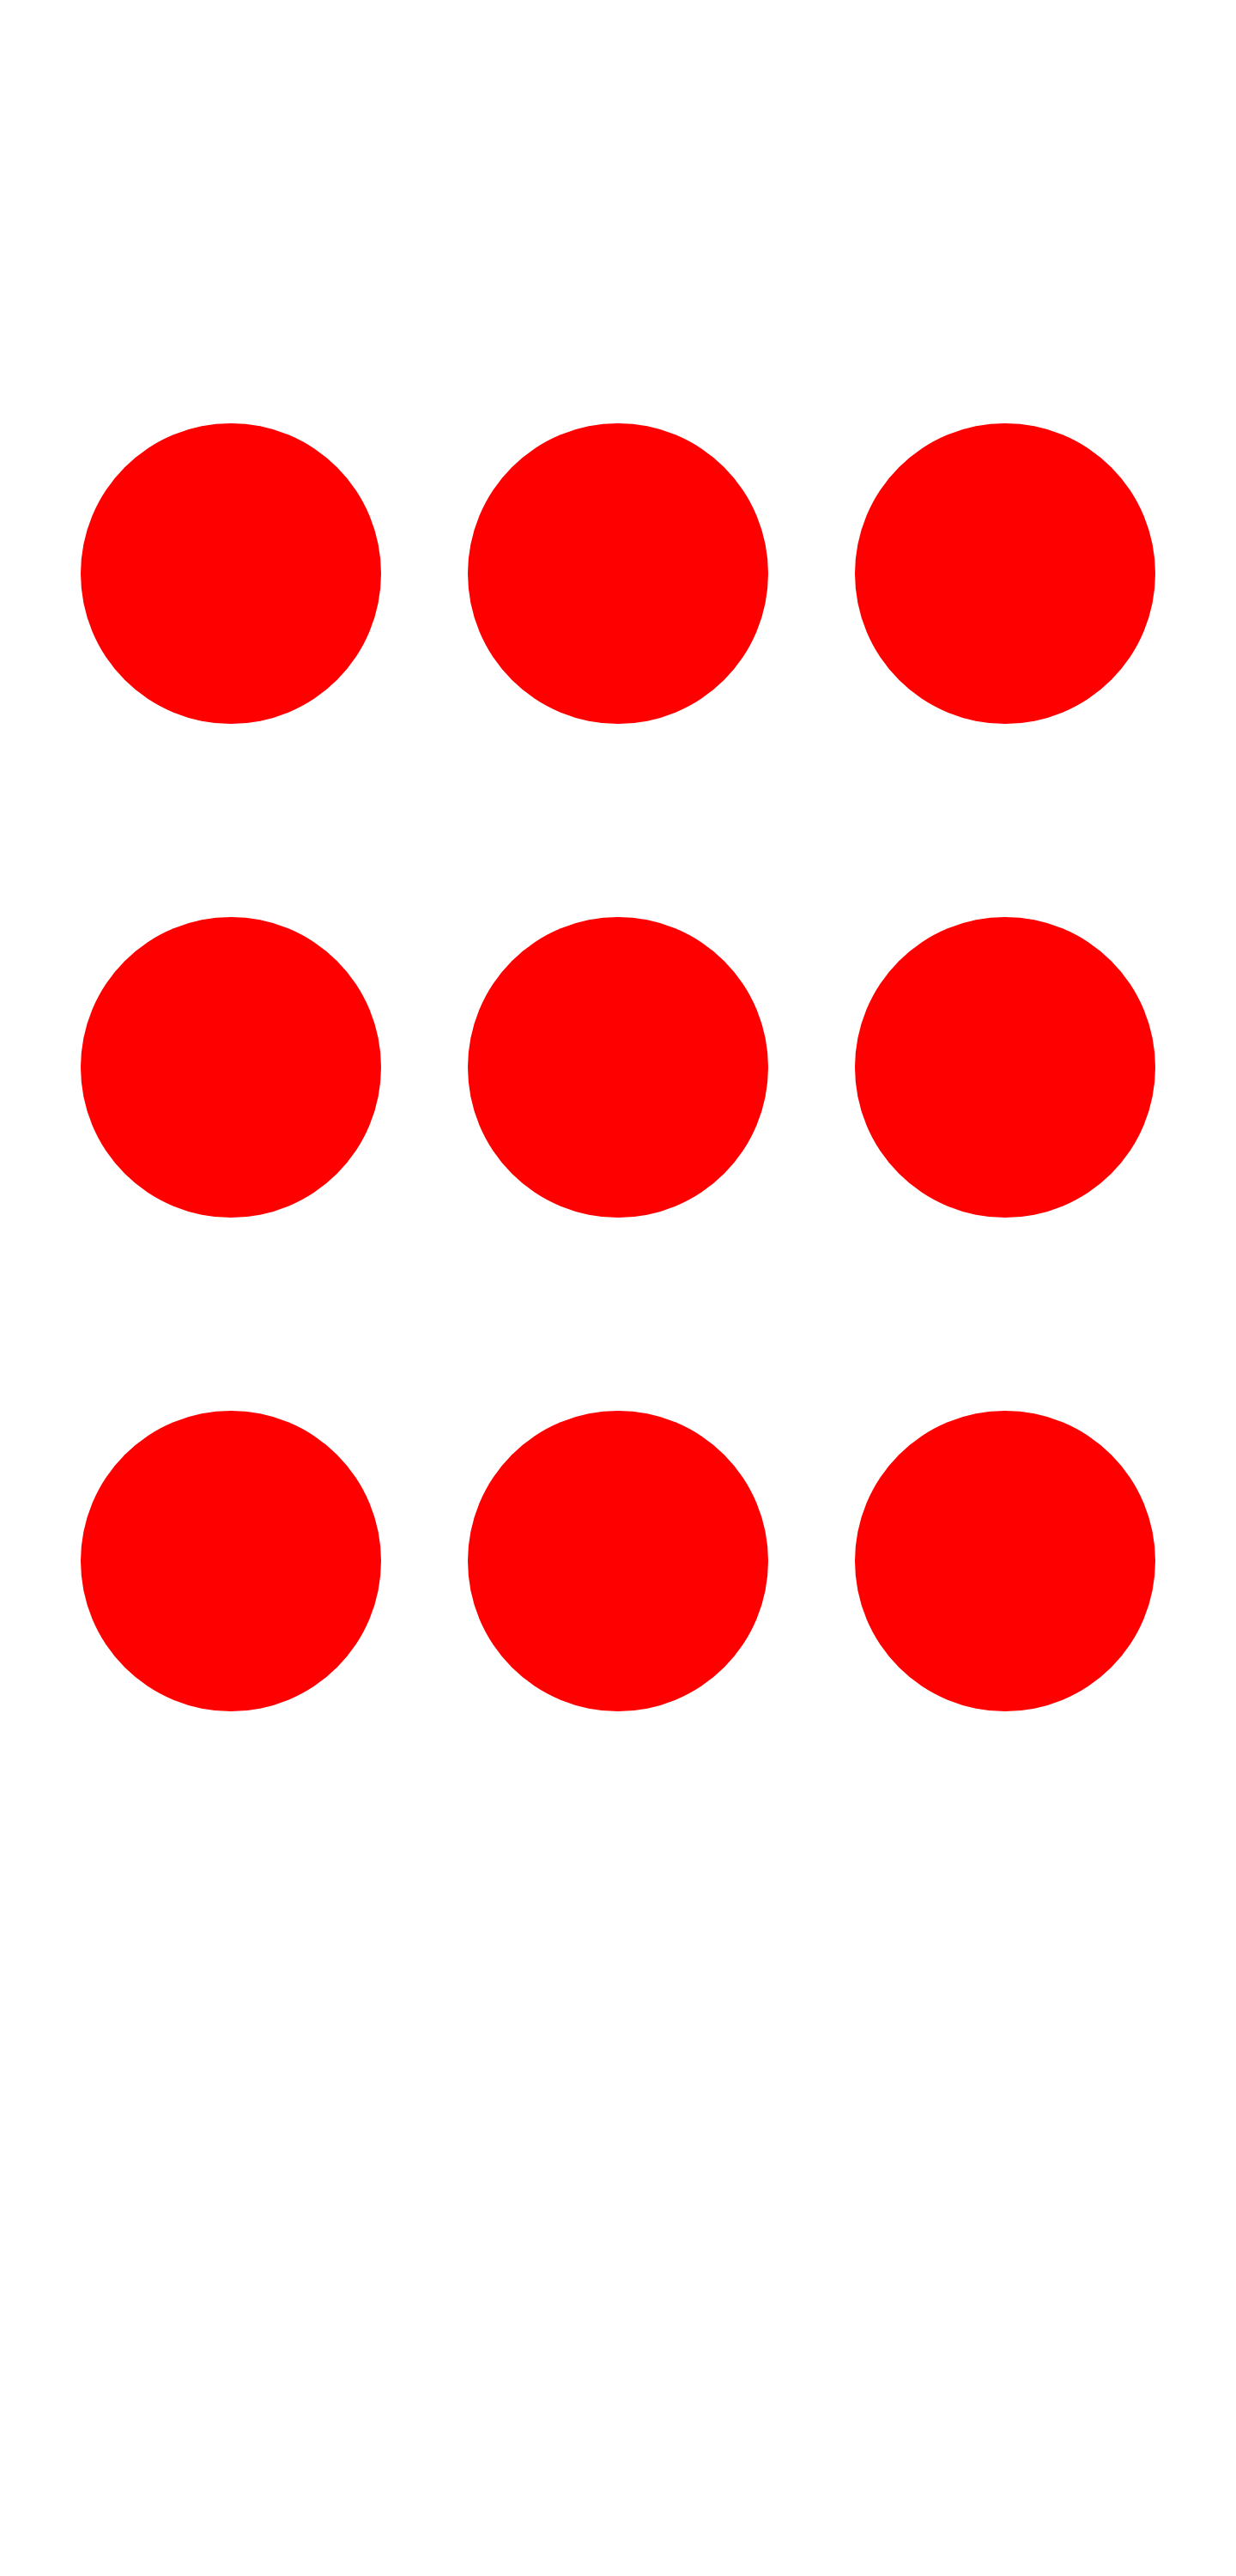 red circles on a grid